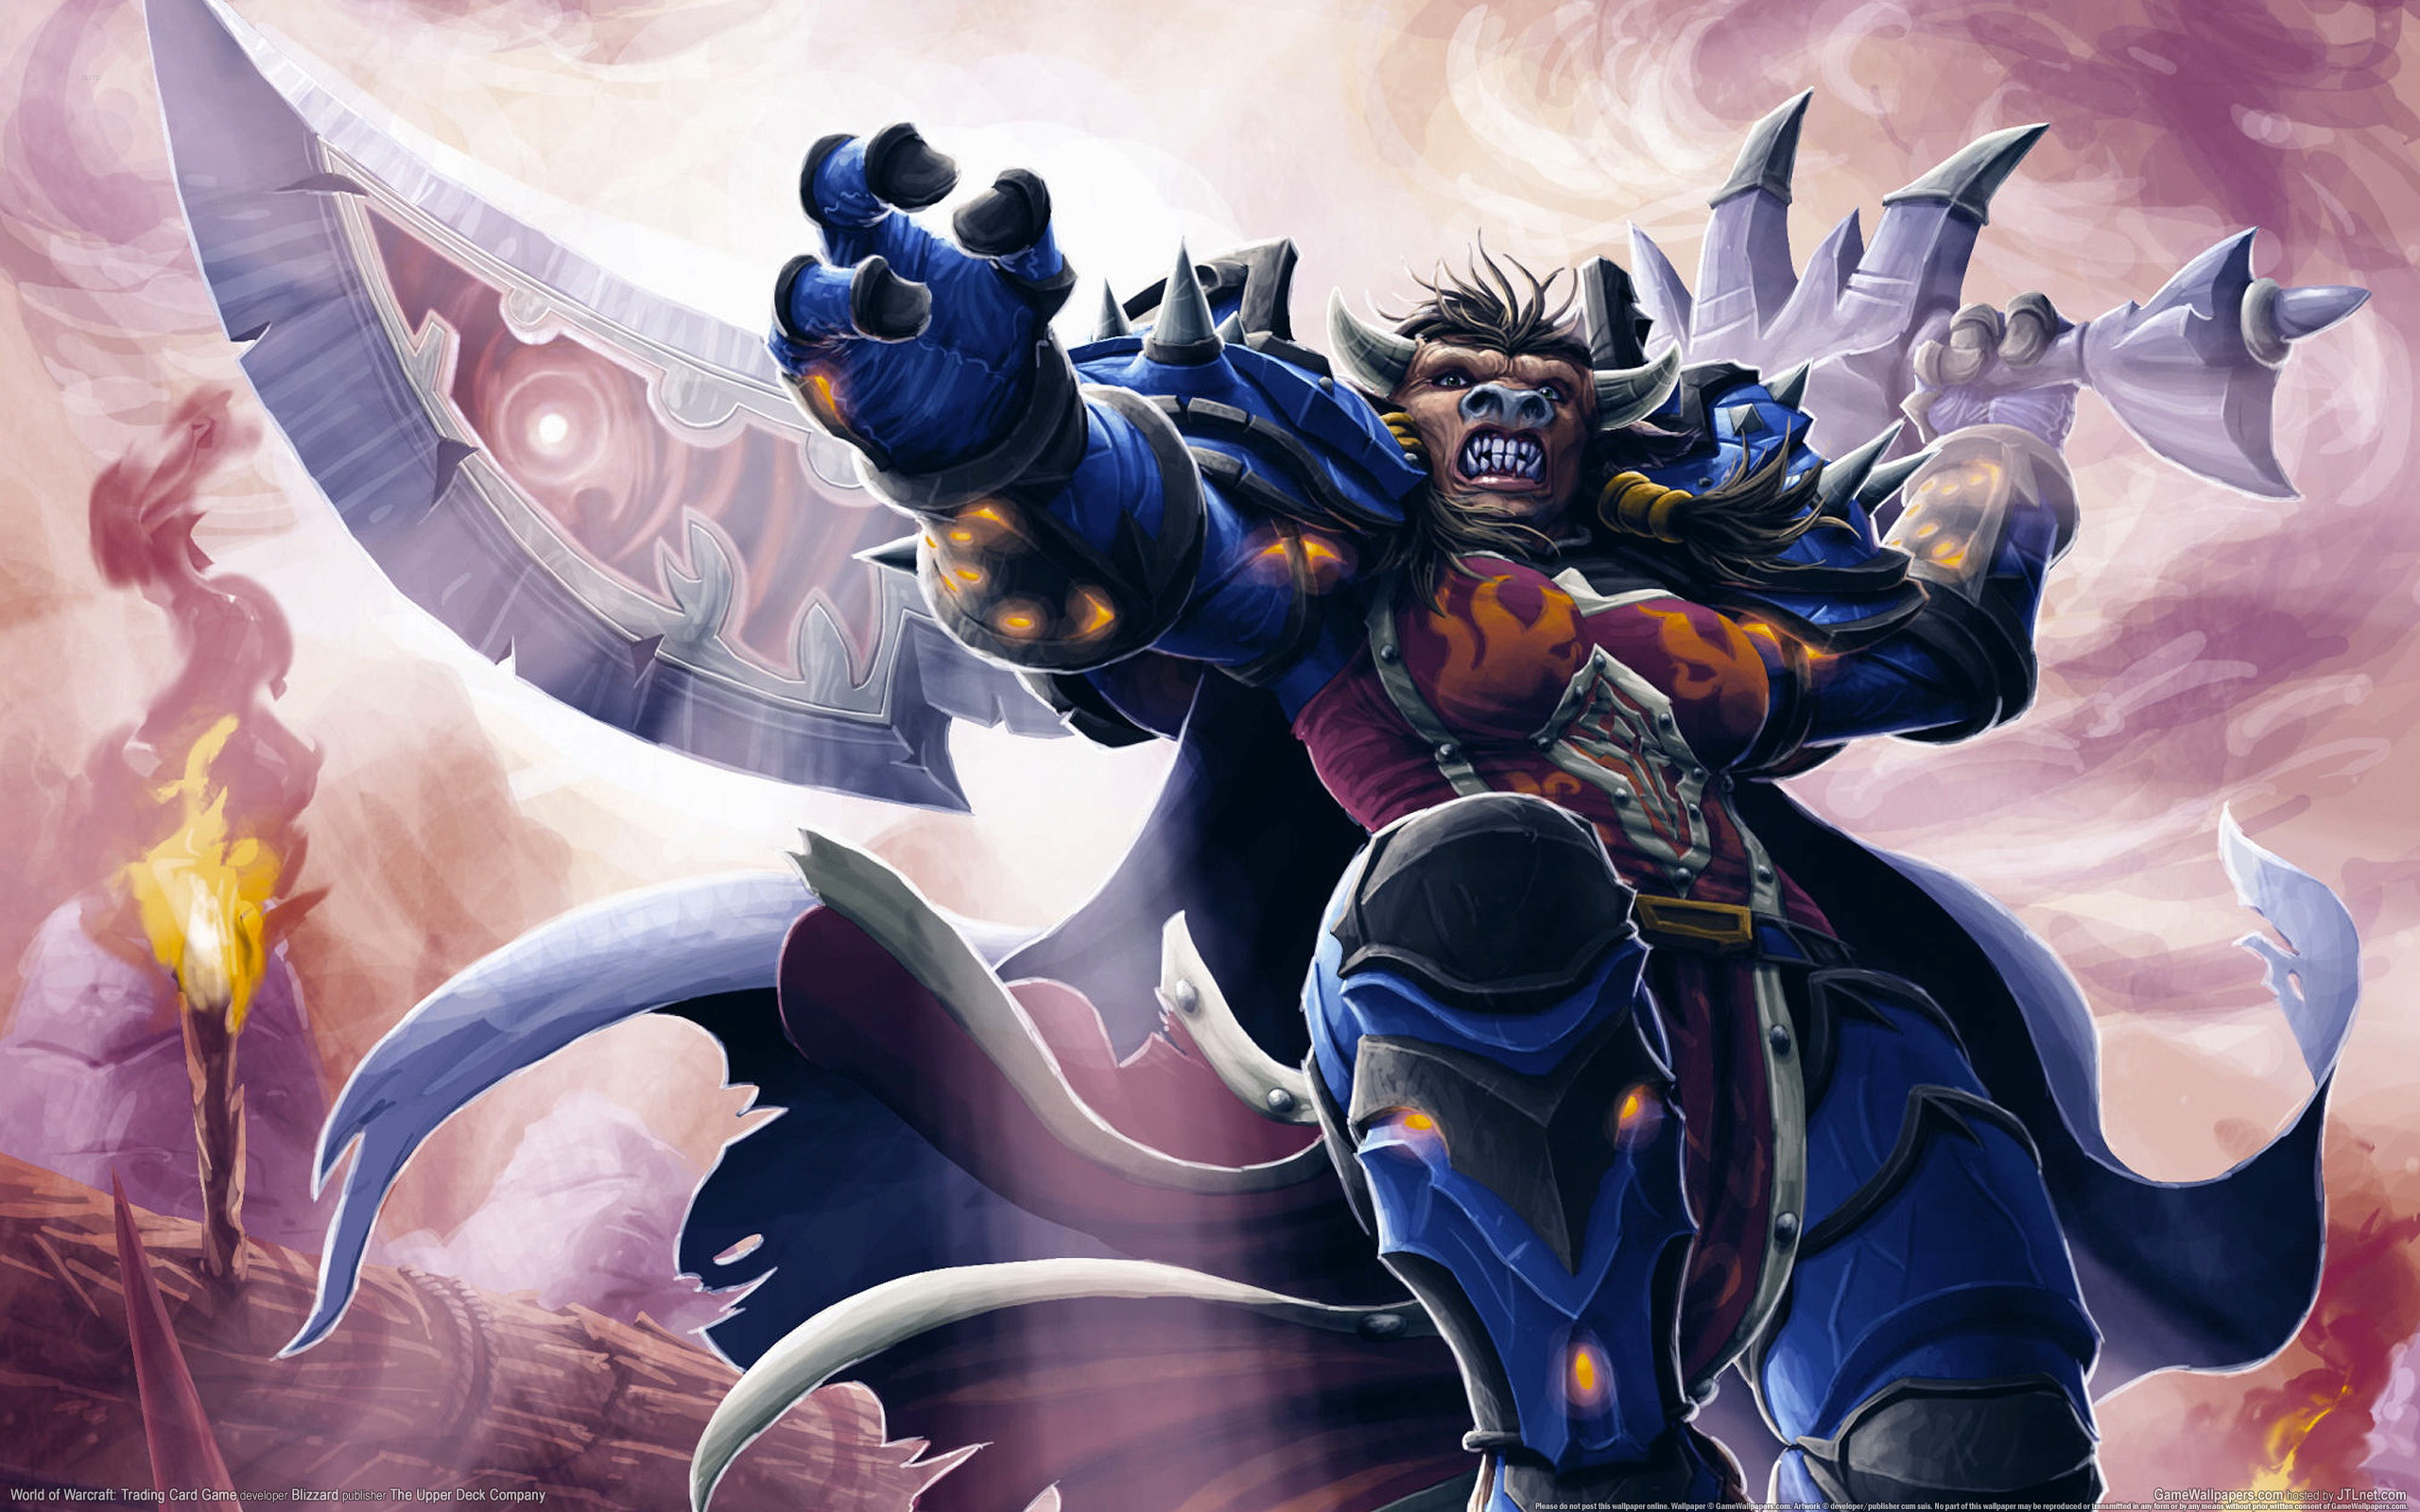 Video Game World Of Warcraft Trading Card Game 2560x1600